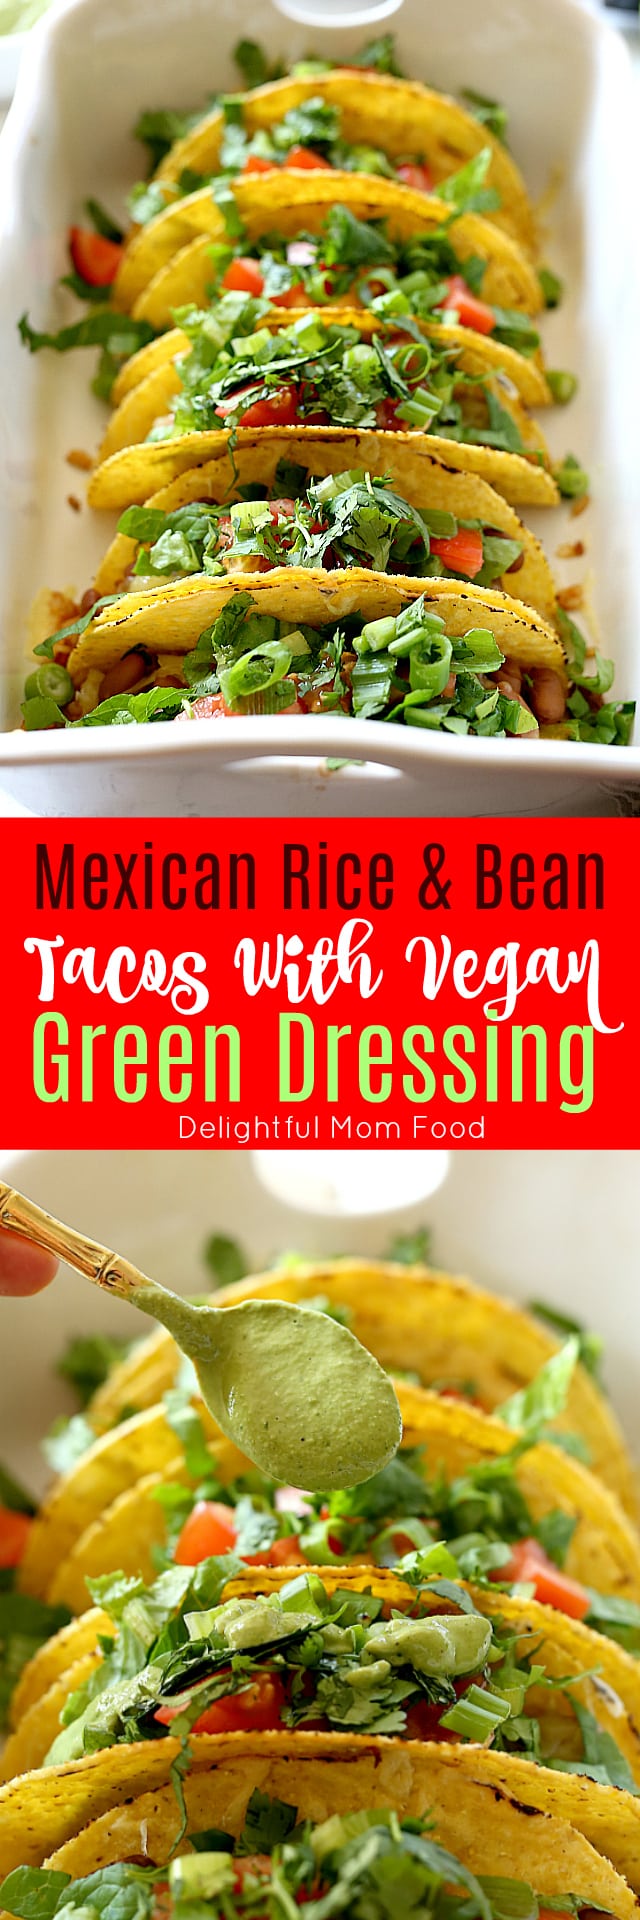 Mexican rice, beans, cheese, lettuce, cilantro and tomatoes stuffed into warm taco shells and topped with a creamy green vegan sauce. Super easy and healthy recipe for hard shell tacos in under 30 minutes!